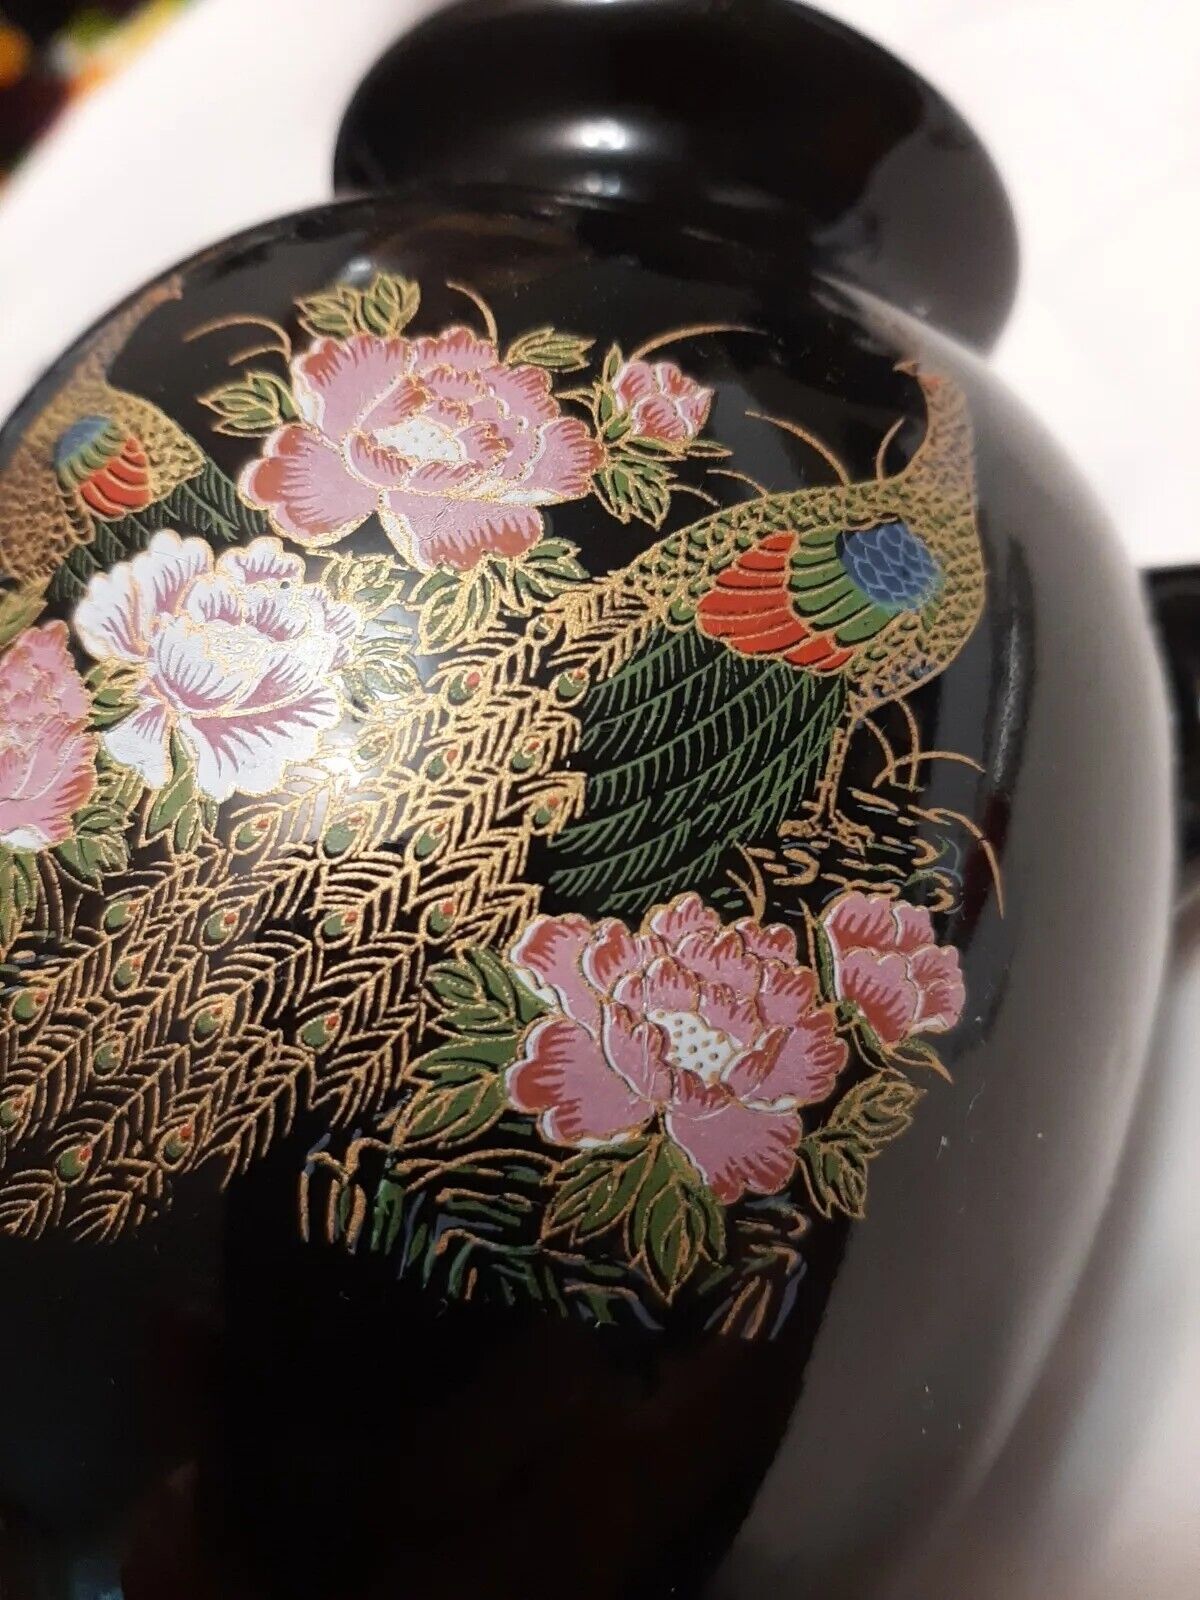 Oriental Vase Black Ceramic Hand Painted approx 5 inches tall Vase beautiful